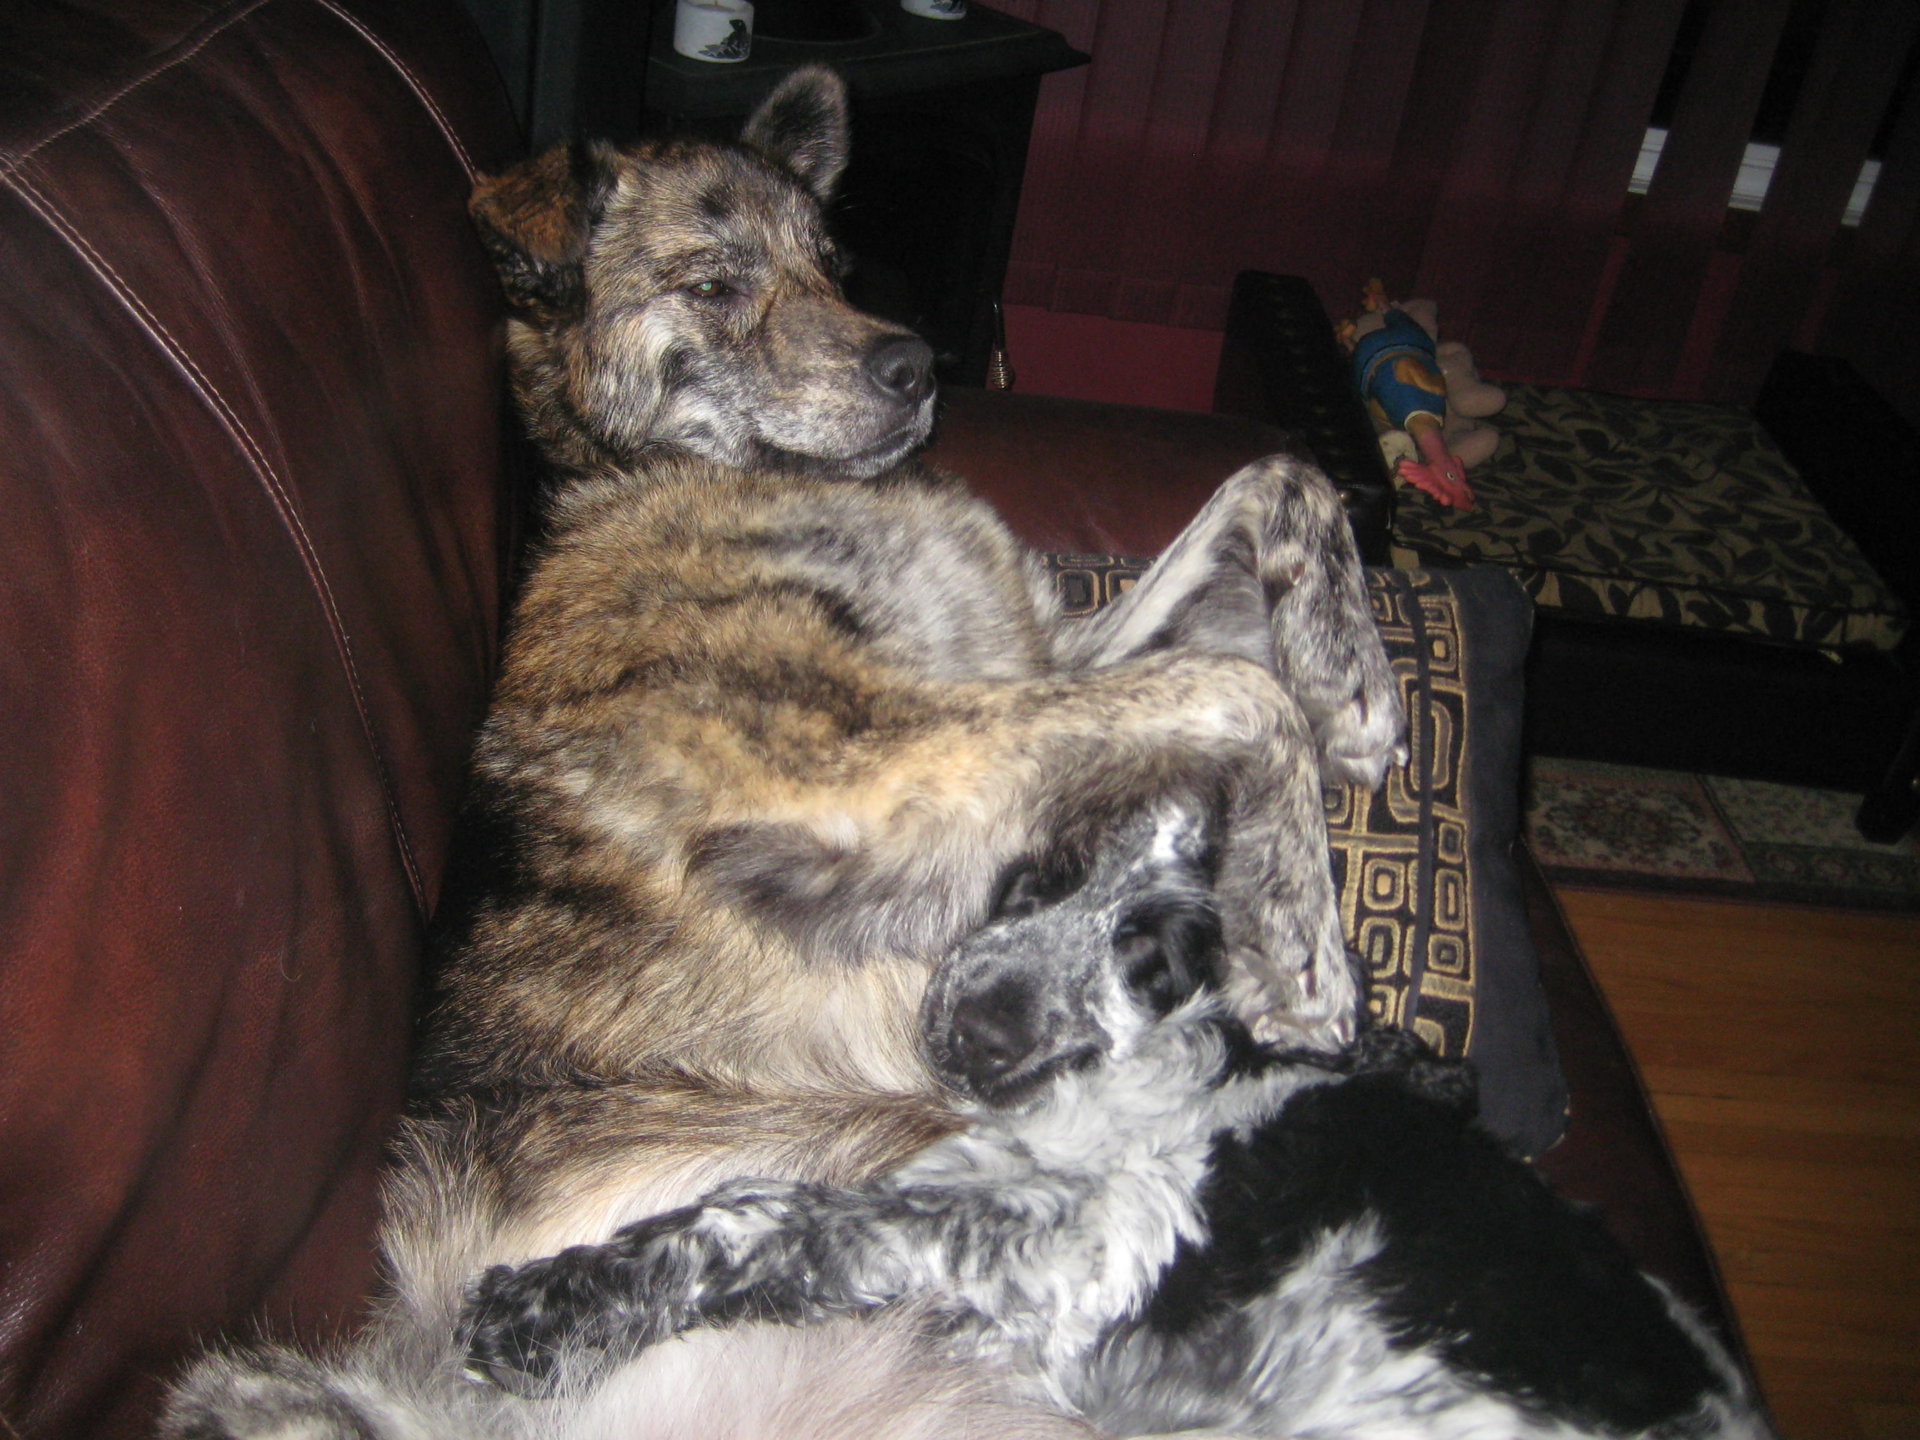 Larry & Buster on the couch together 030.jpg